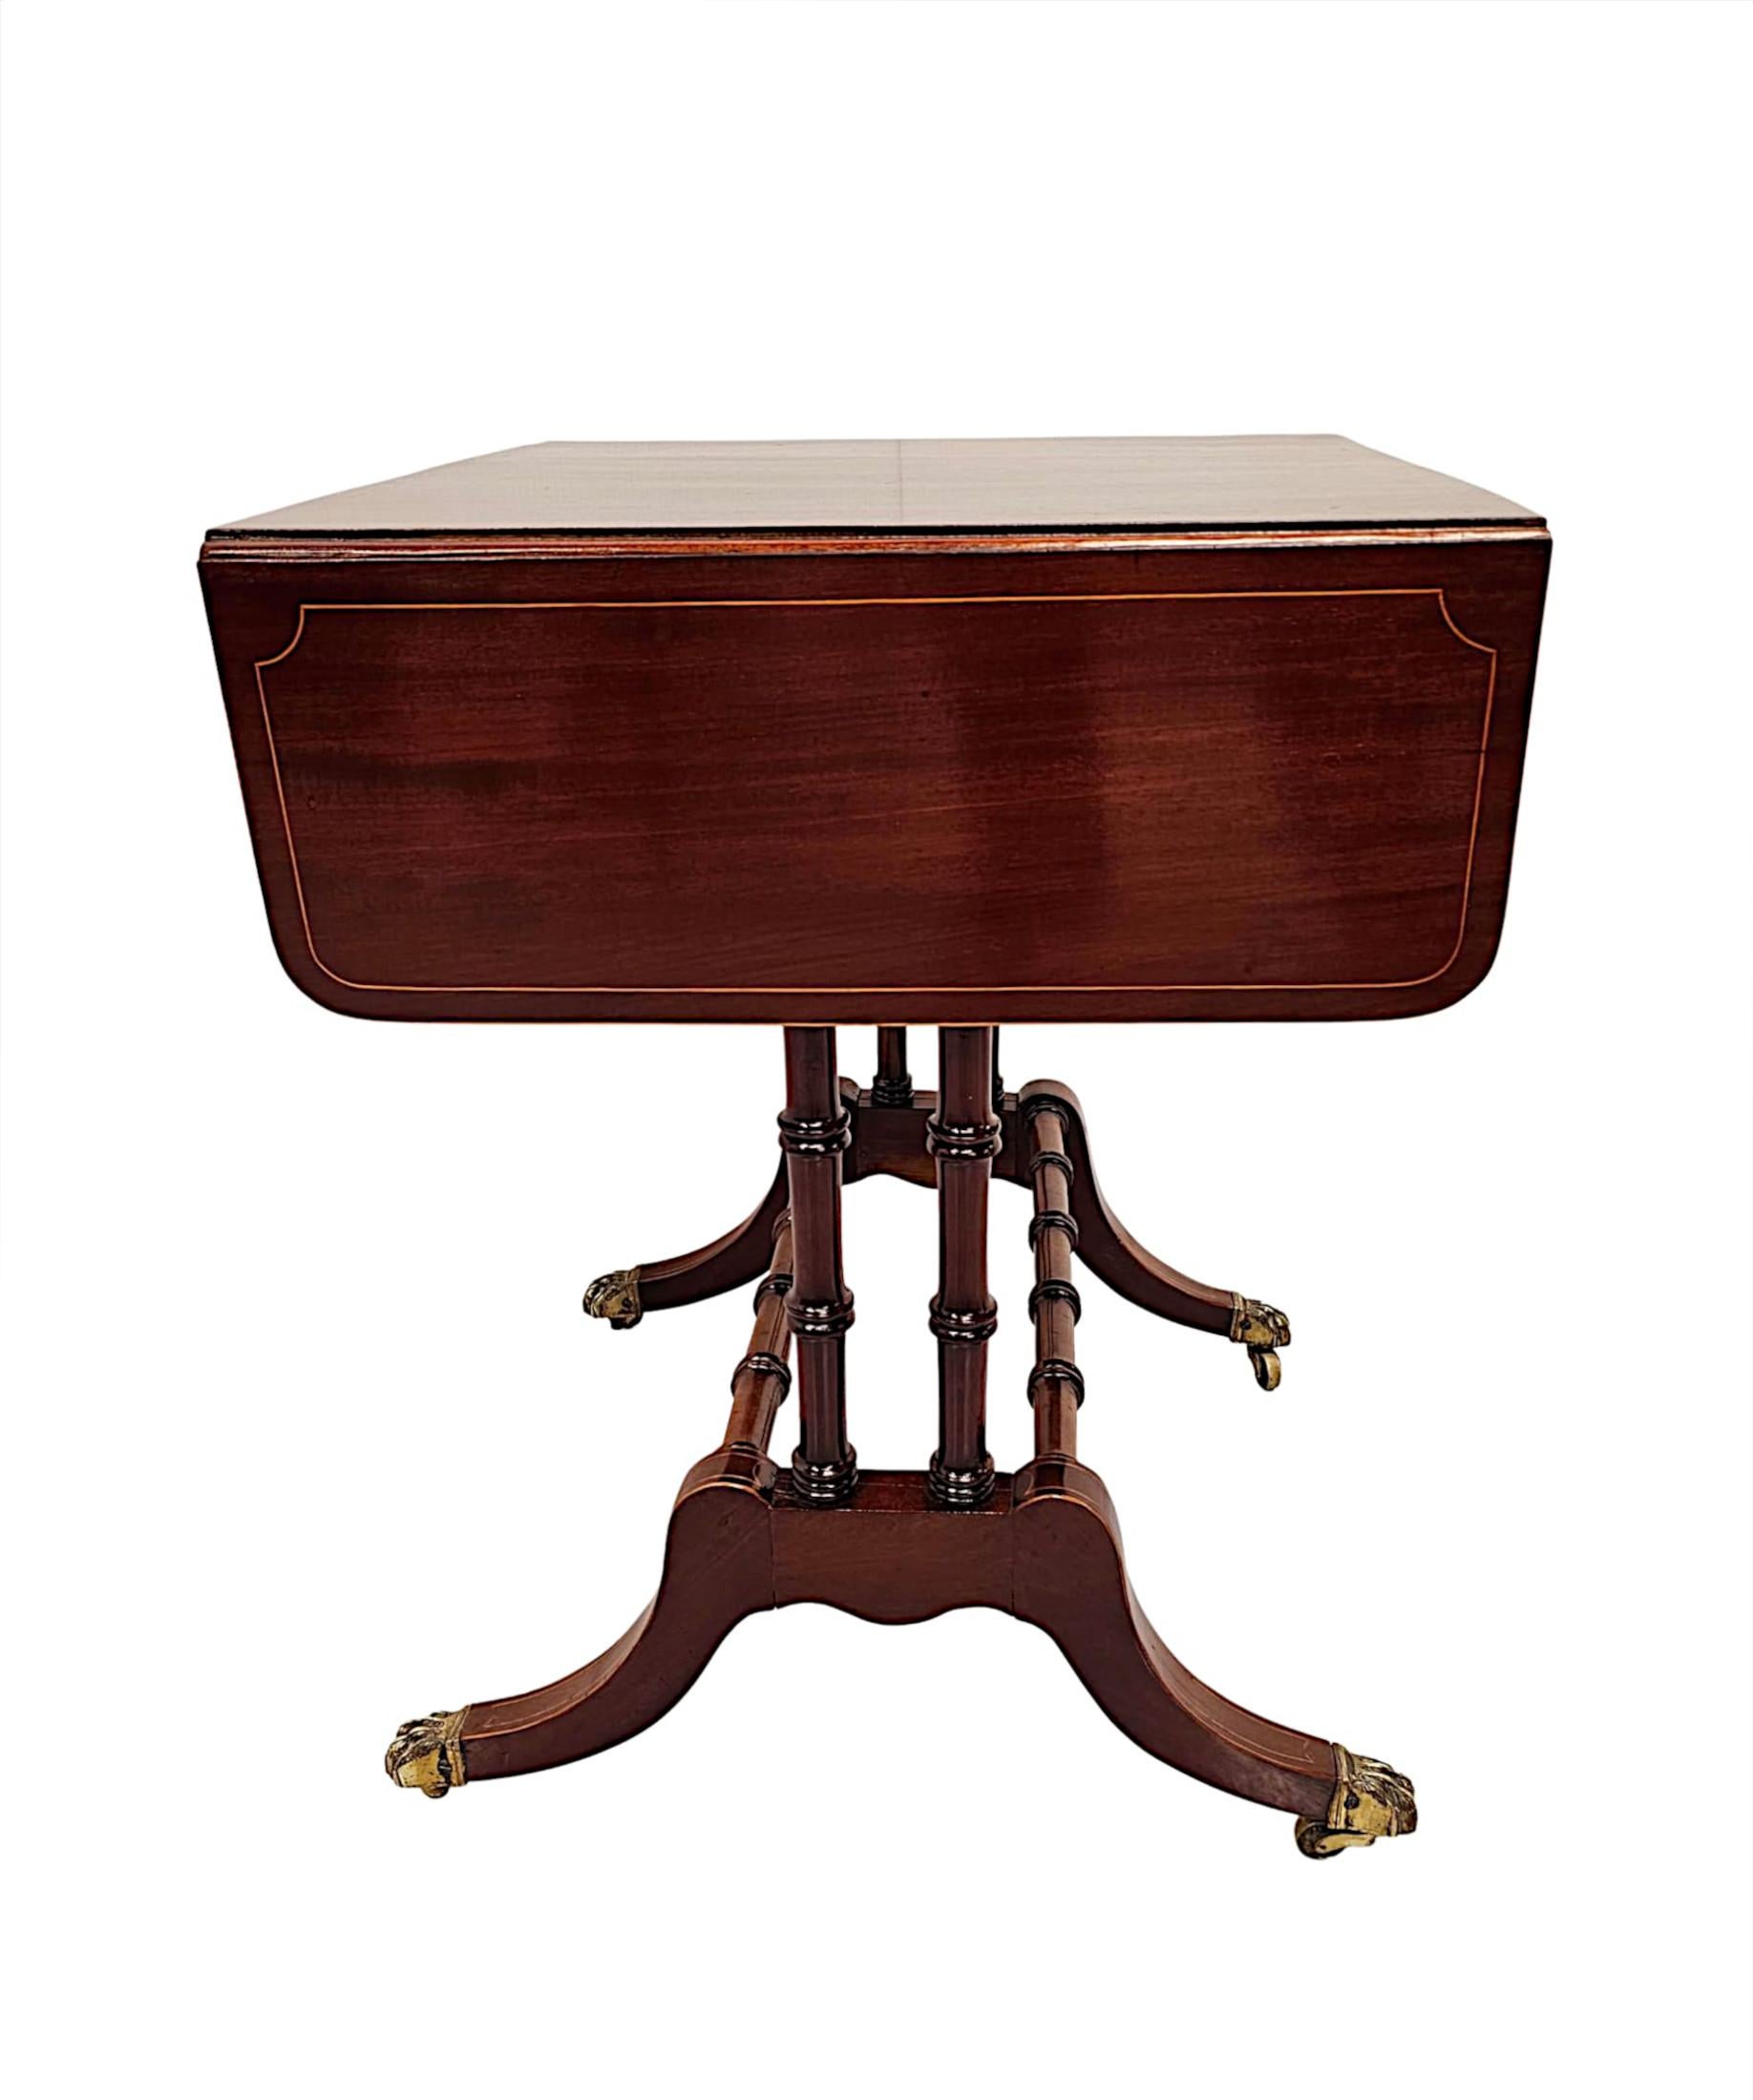  A Fabulous Late 19th Century Inlaid Sofa or Lamp Table For Sale 1